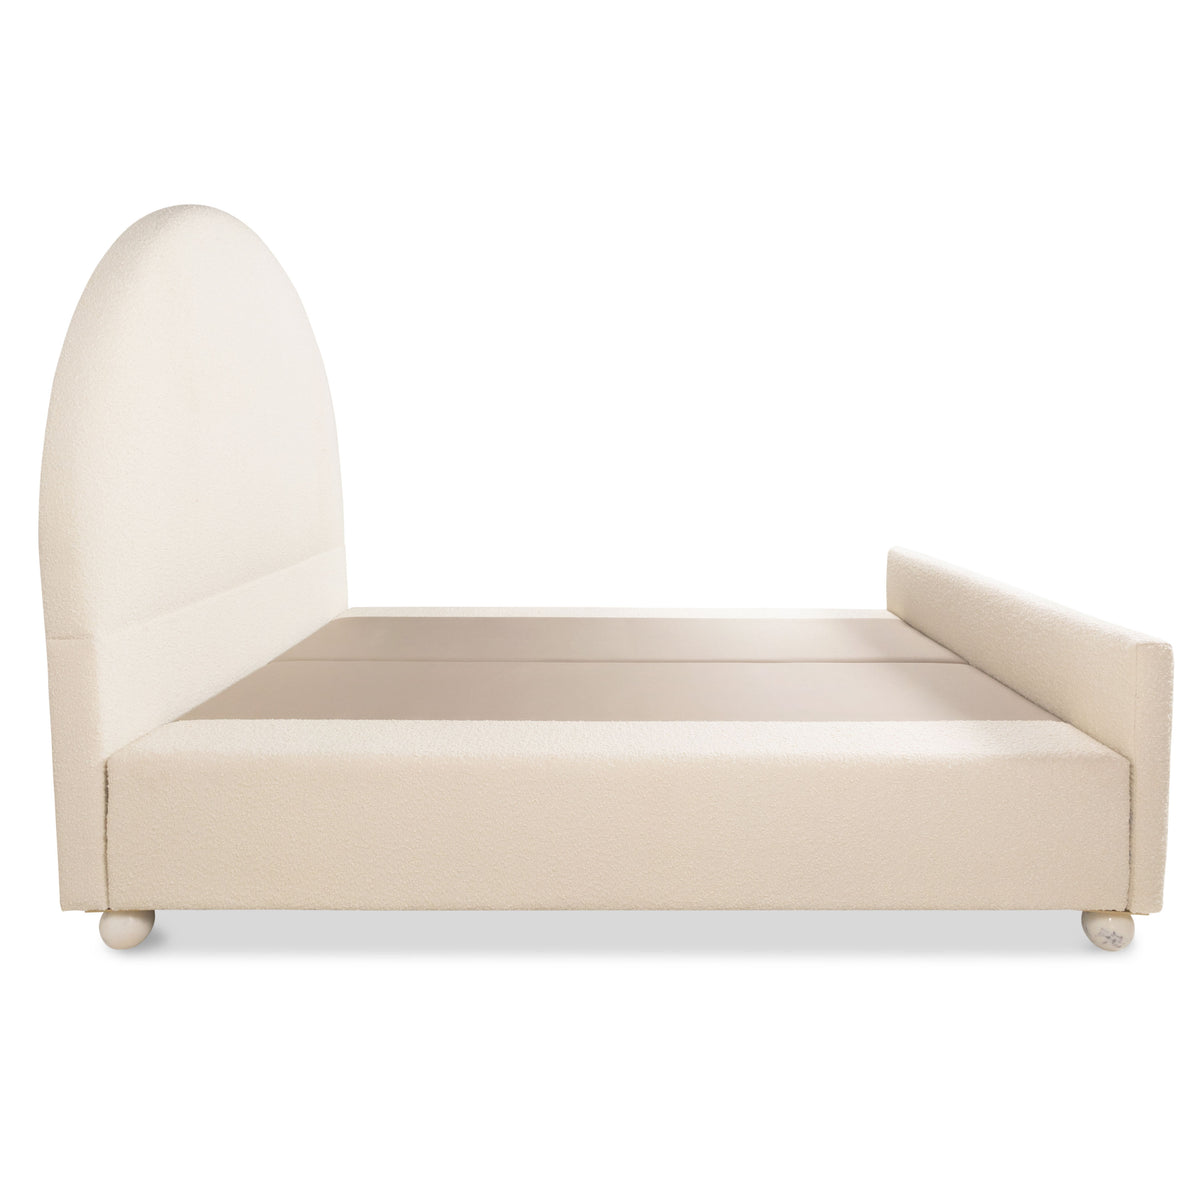 Acapulco Bed in Boucle with Foot Board